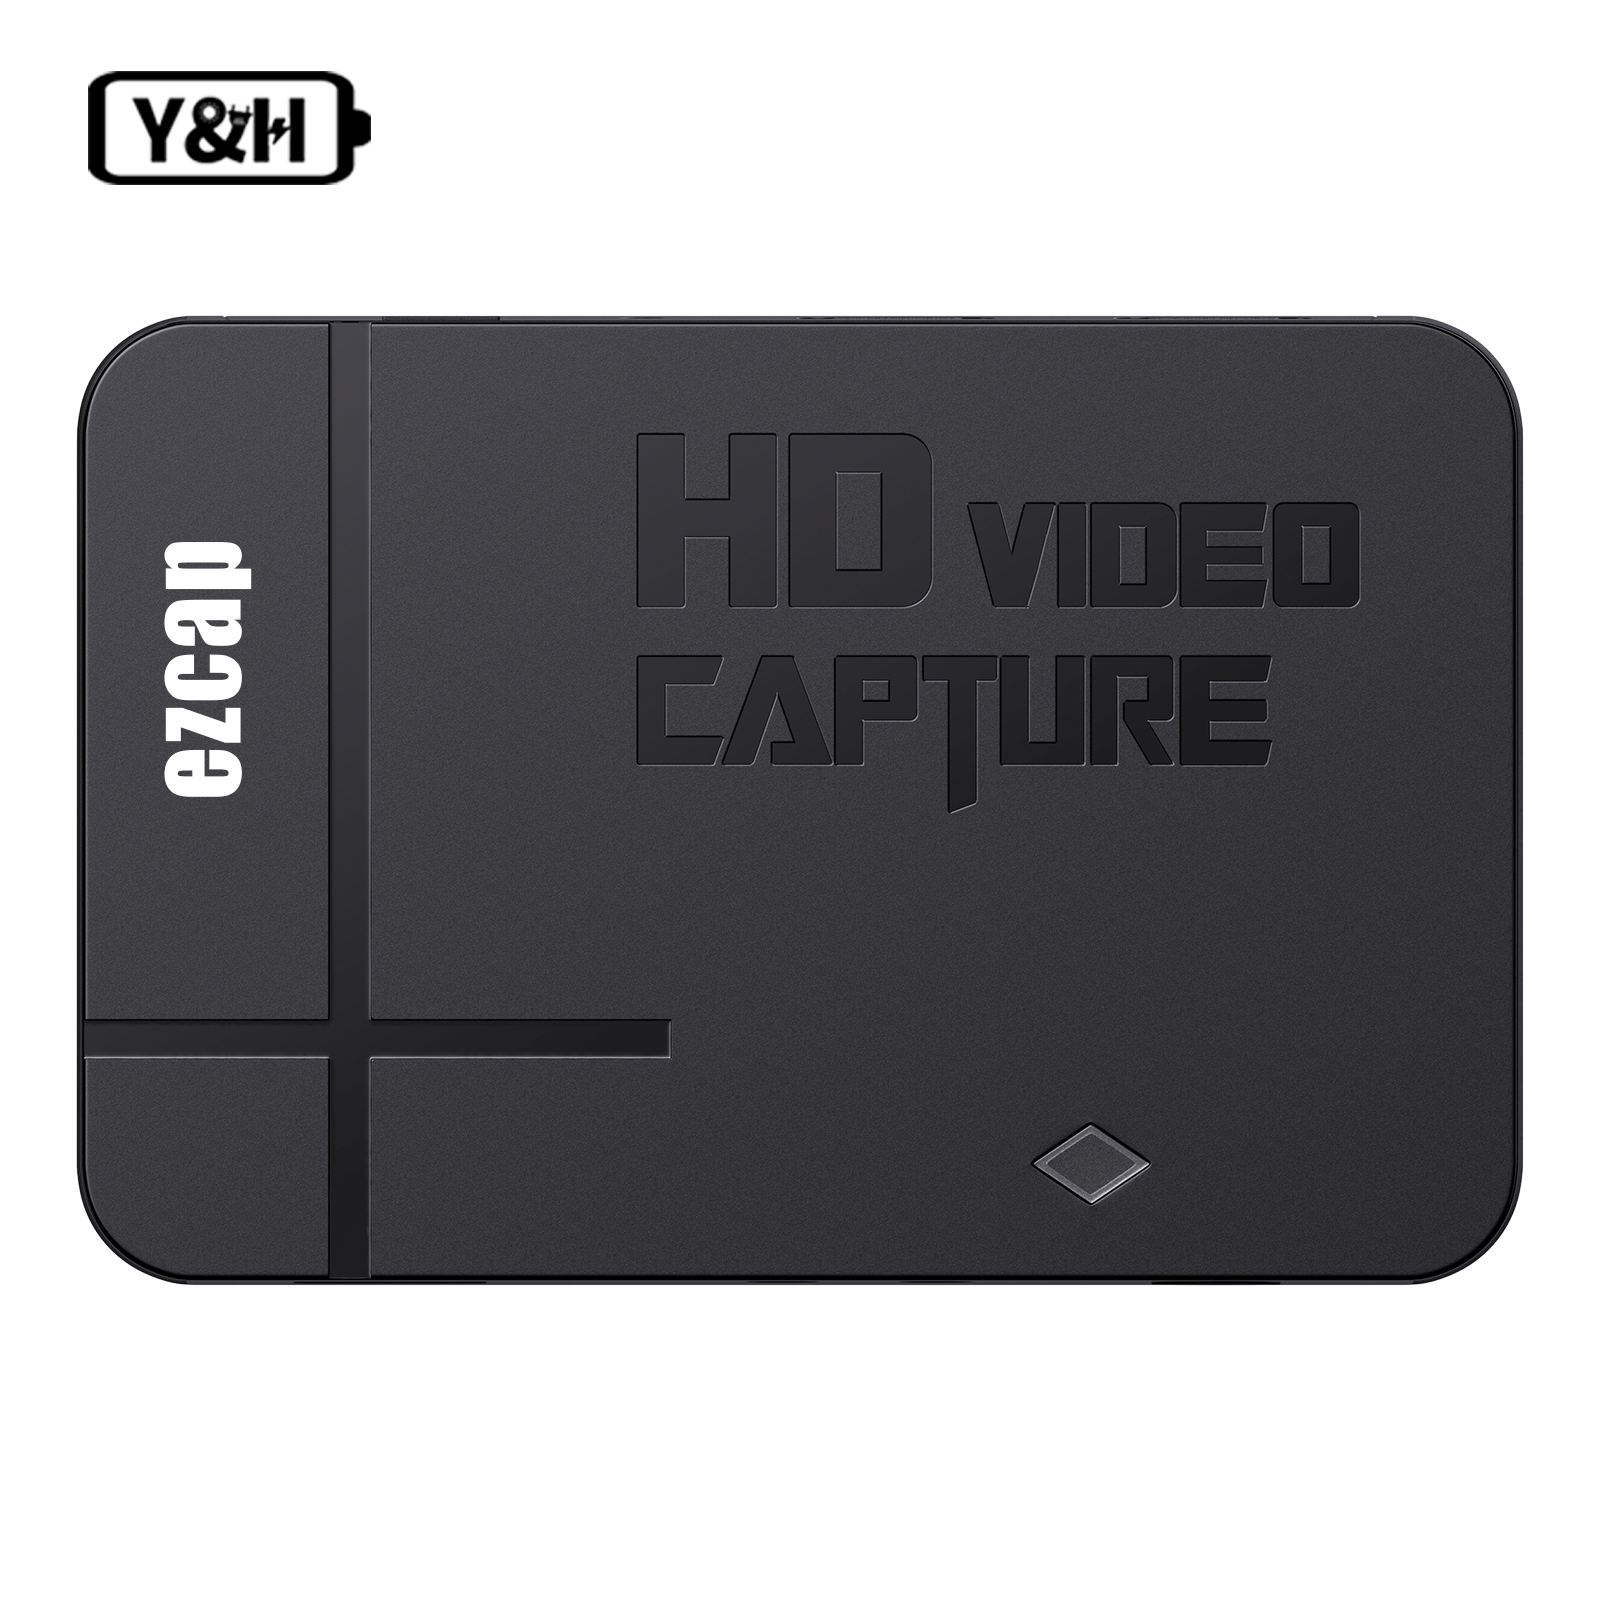 Y&H HDMI AV Video Capture Card HD 1080P Game Recorder with HDMI